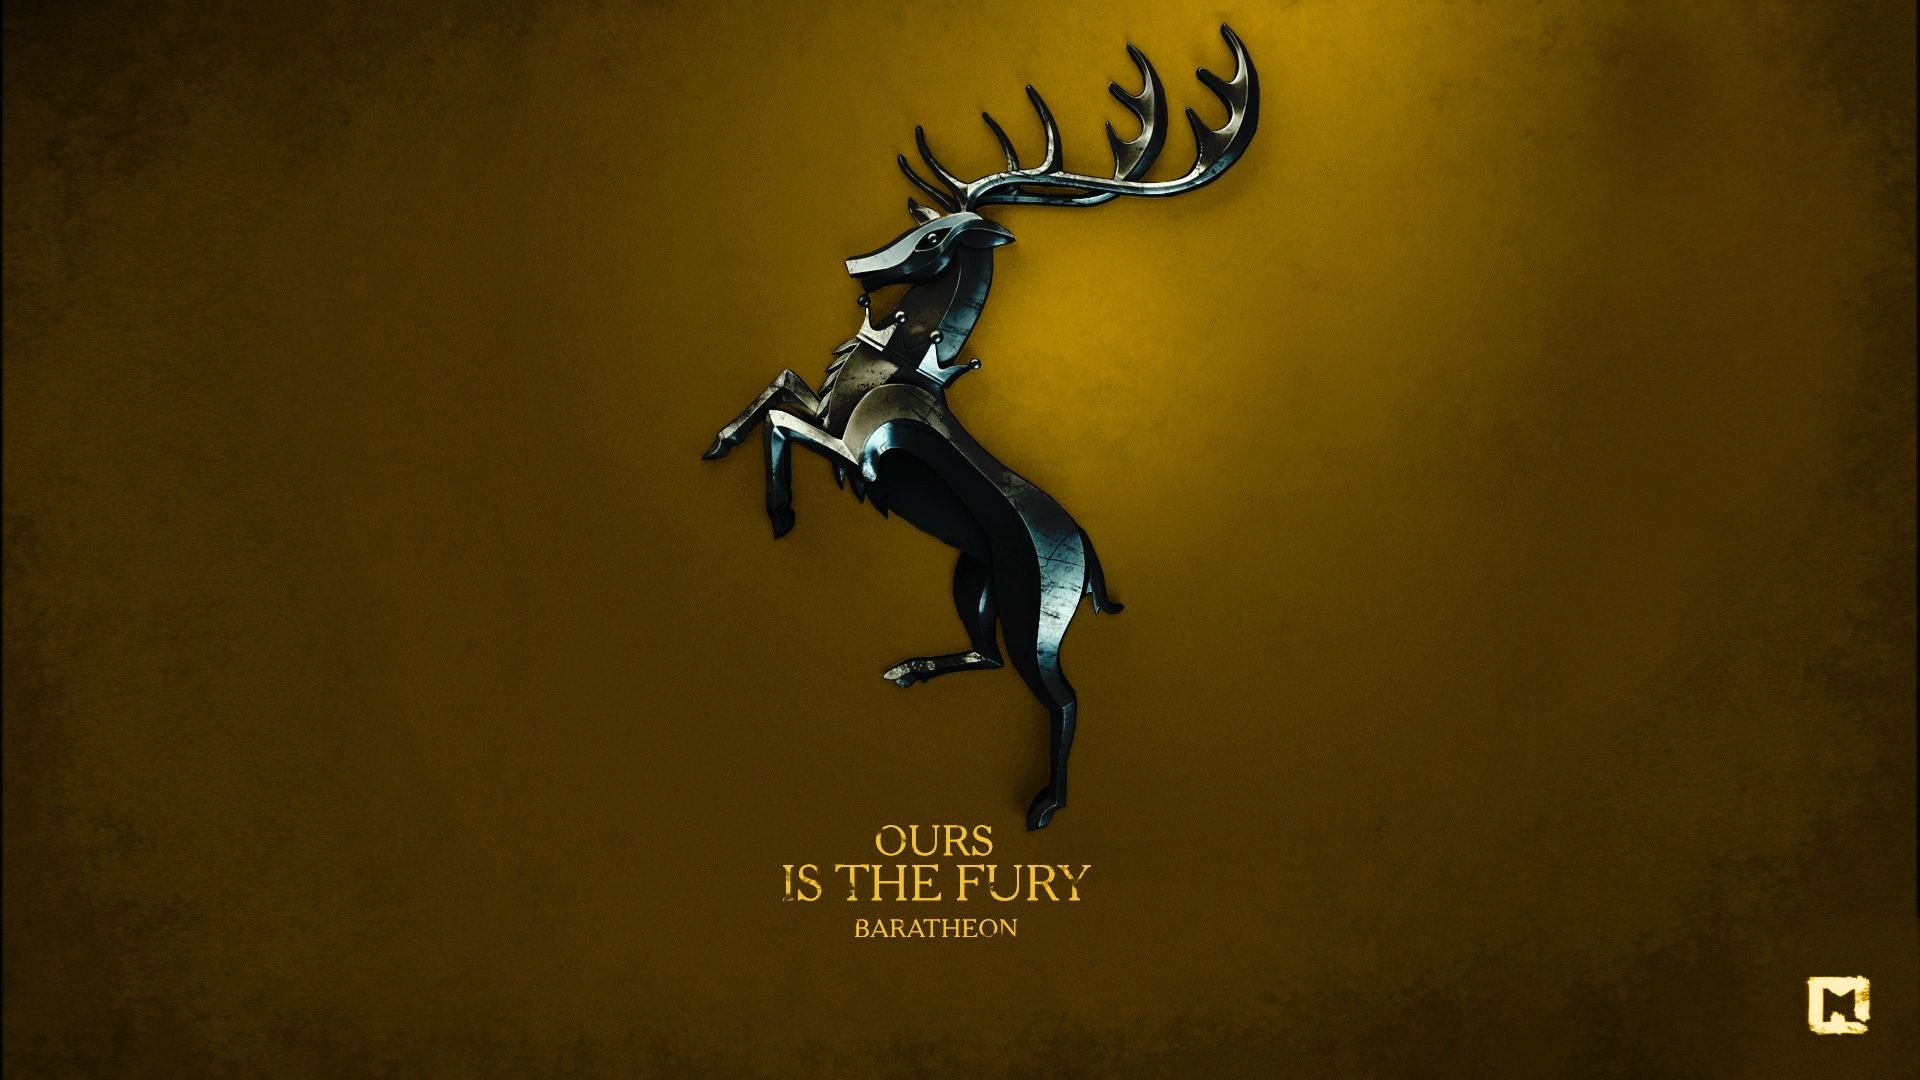 multicolor, Game, Of, Thrones, Tv, Series, House, Baratheon, Ours, Of, The, Fury Wallpaper